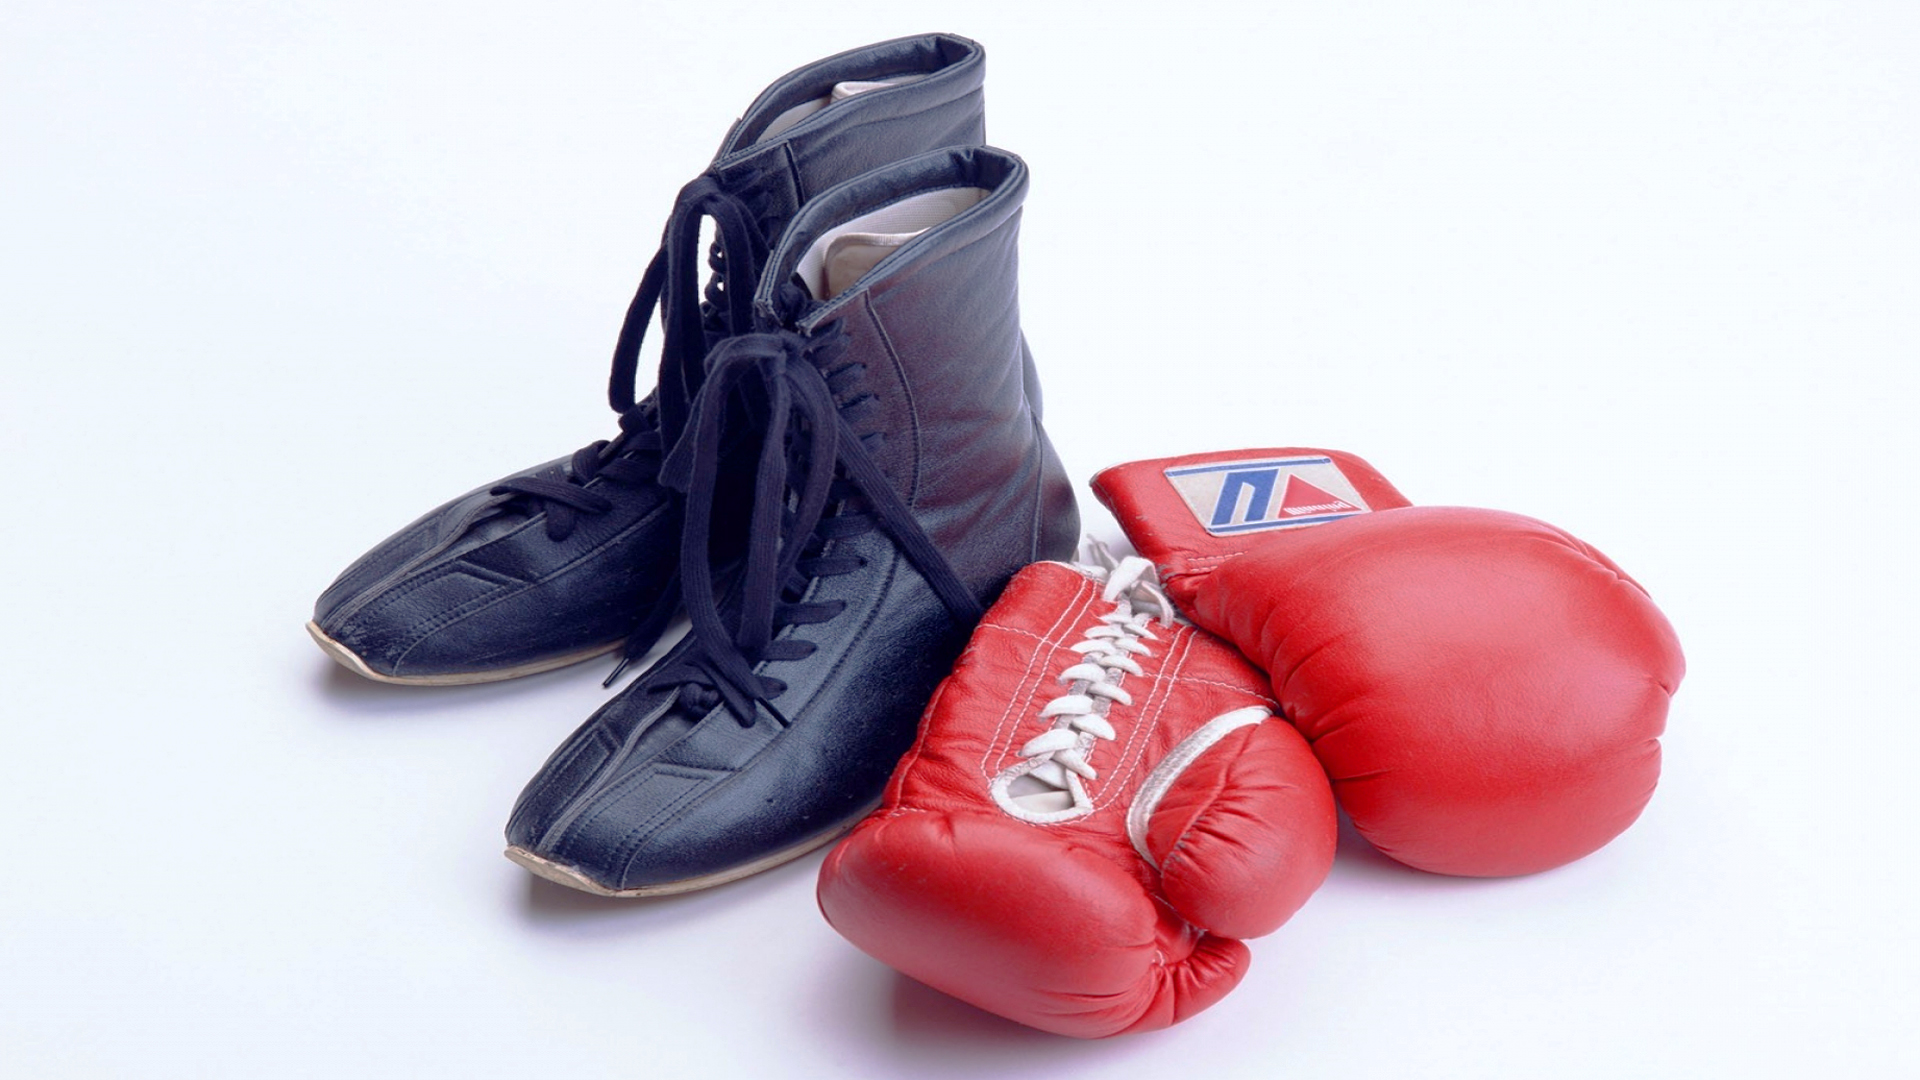 Boxing Gloves And Shoes Choice Wallpaper